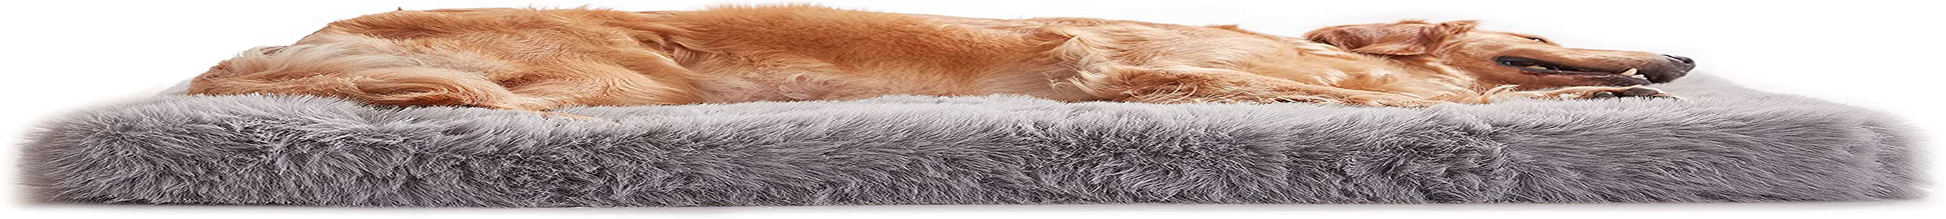 PETABBY Orthopedic Dog Bed for Large Dogs, Self-Warming Plush Dog Bed Mattress with Washable Removable Cover, Dog Bed Pillow Cushion with Waterproof Lining for Medium Jumbo Dog